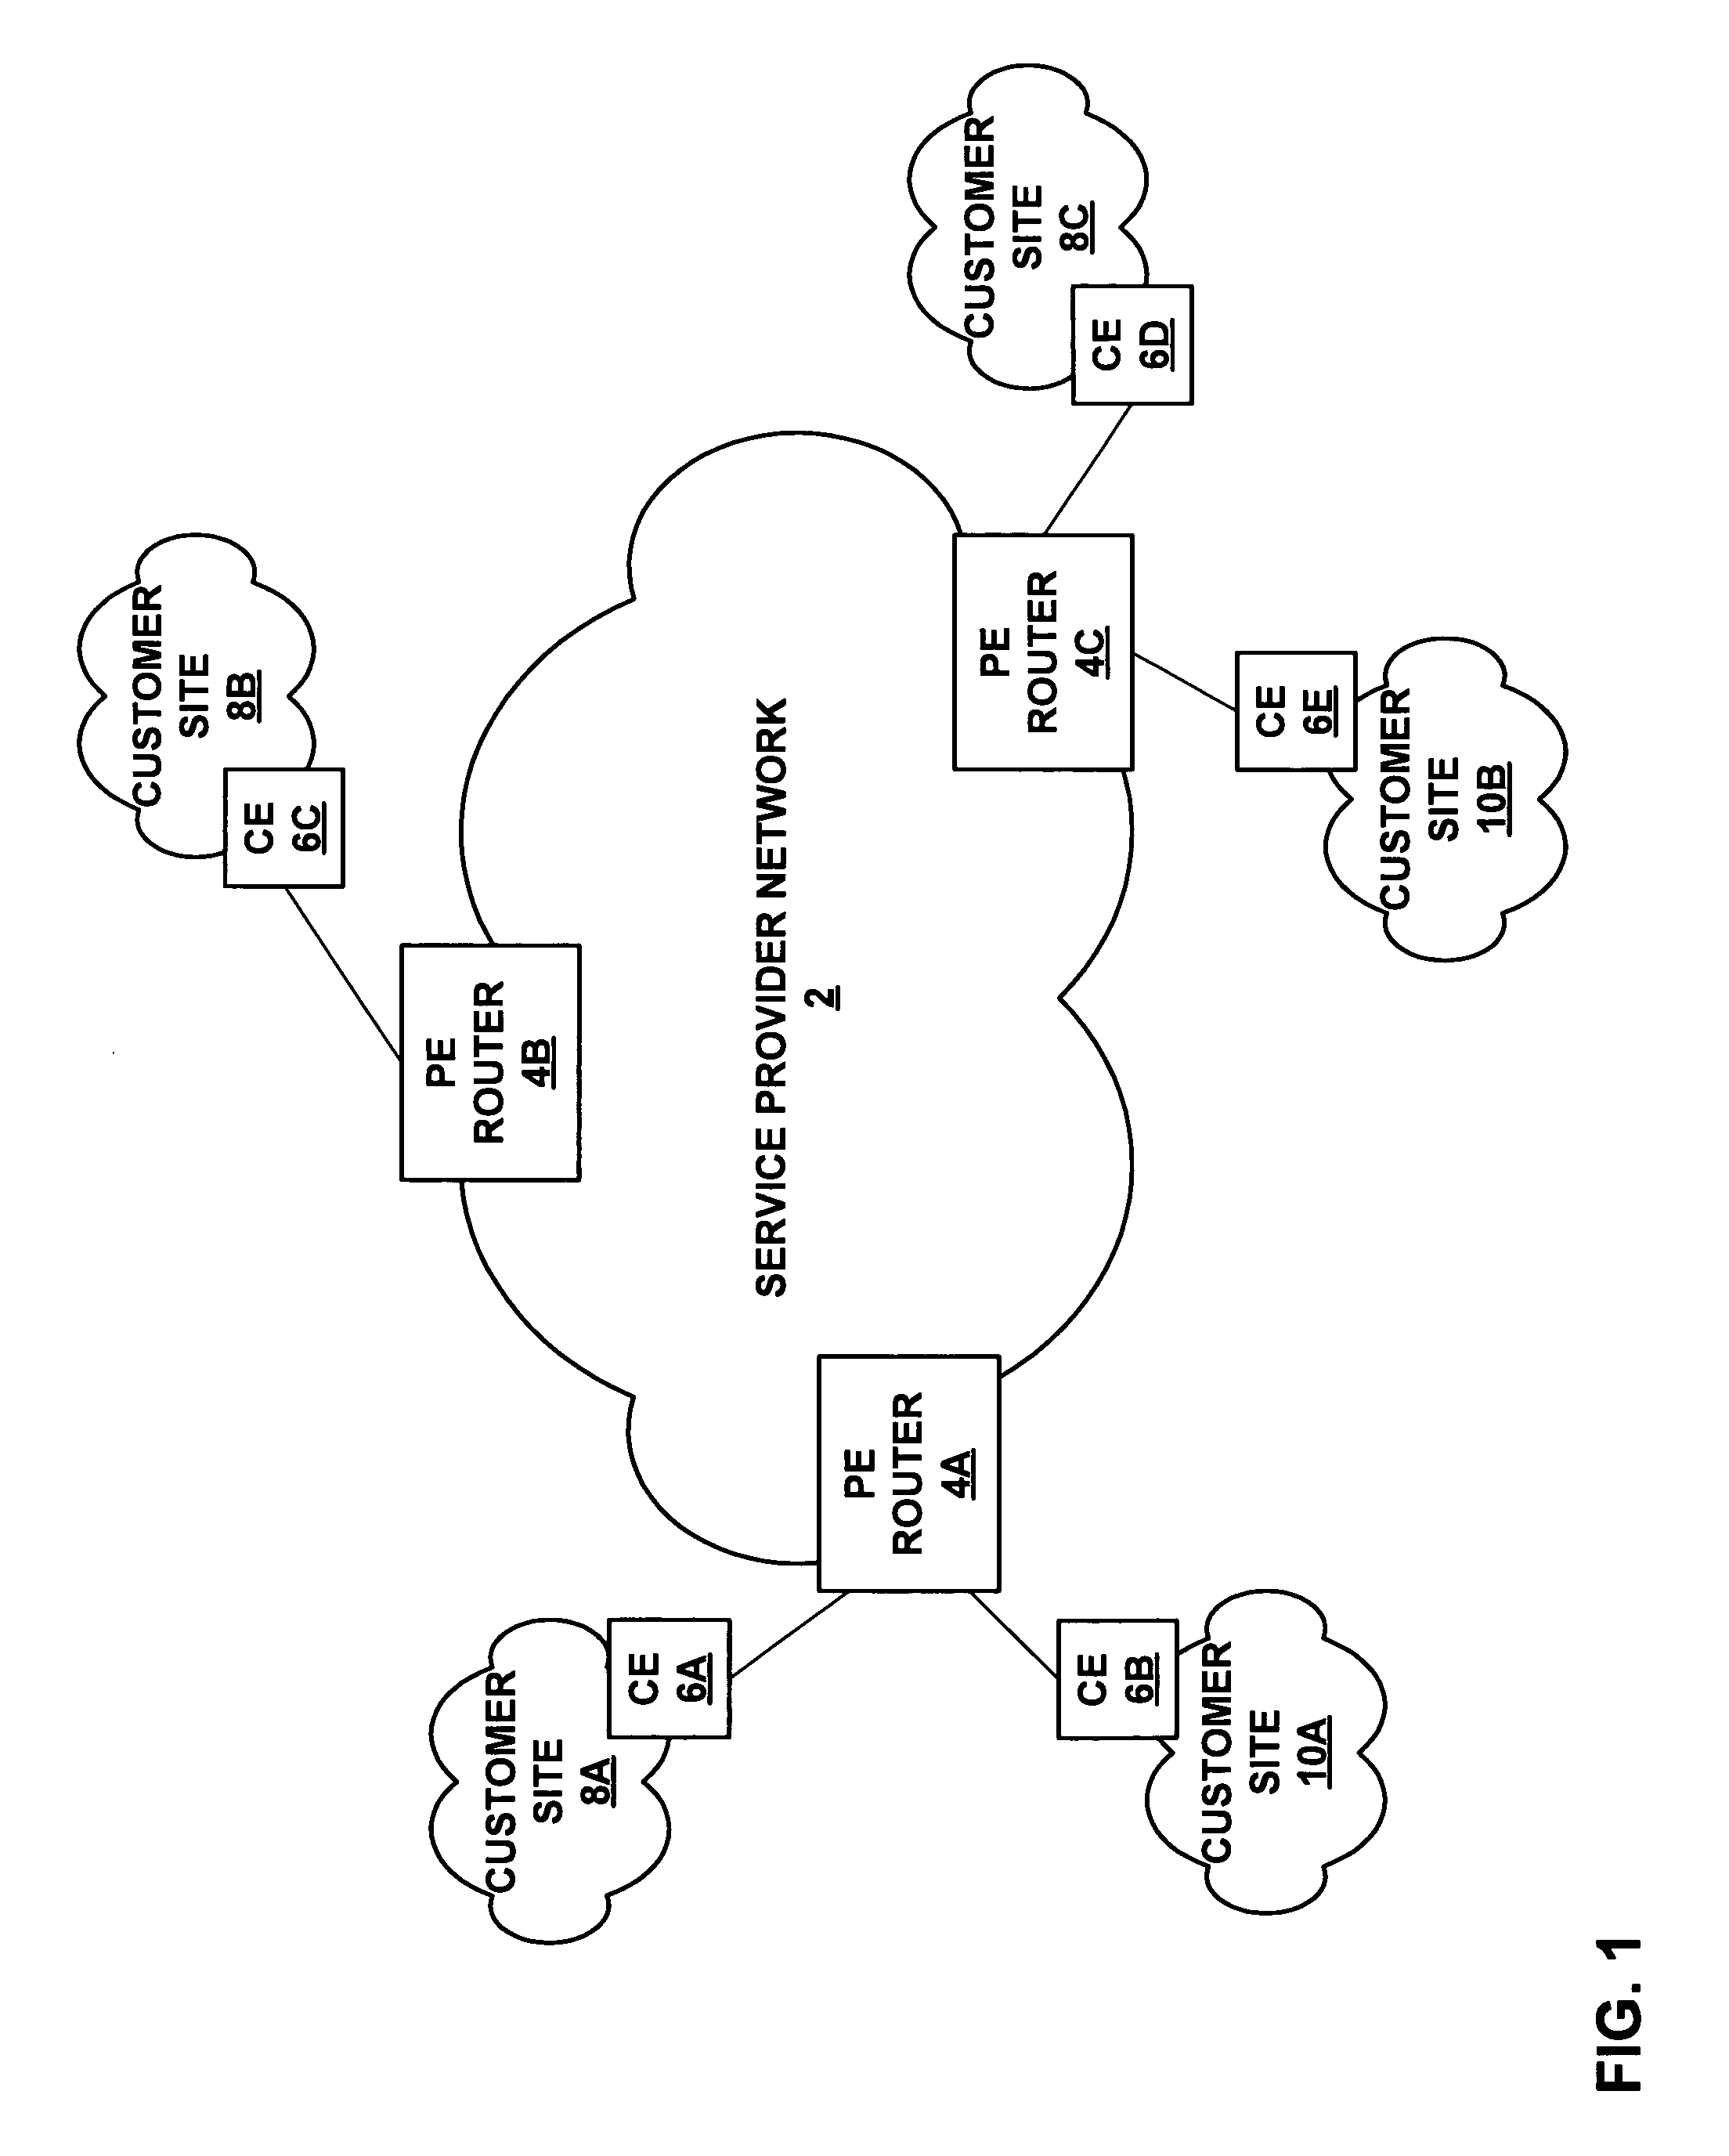 Automatic selection of site-IDs for virtual private networks